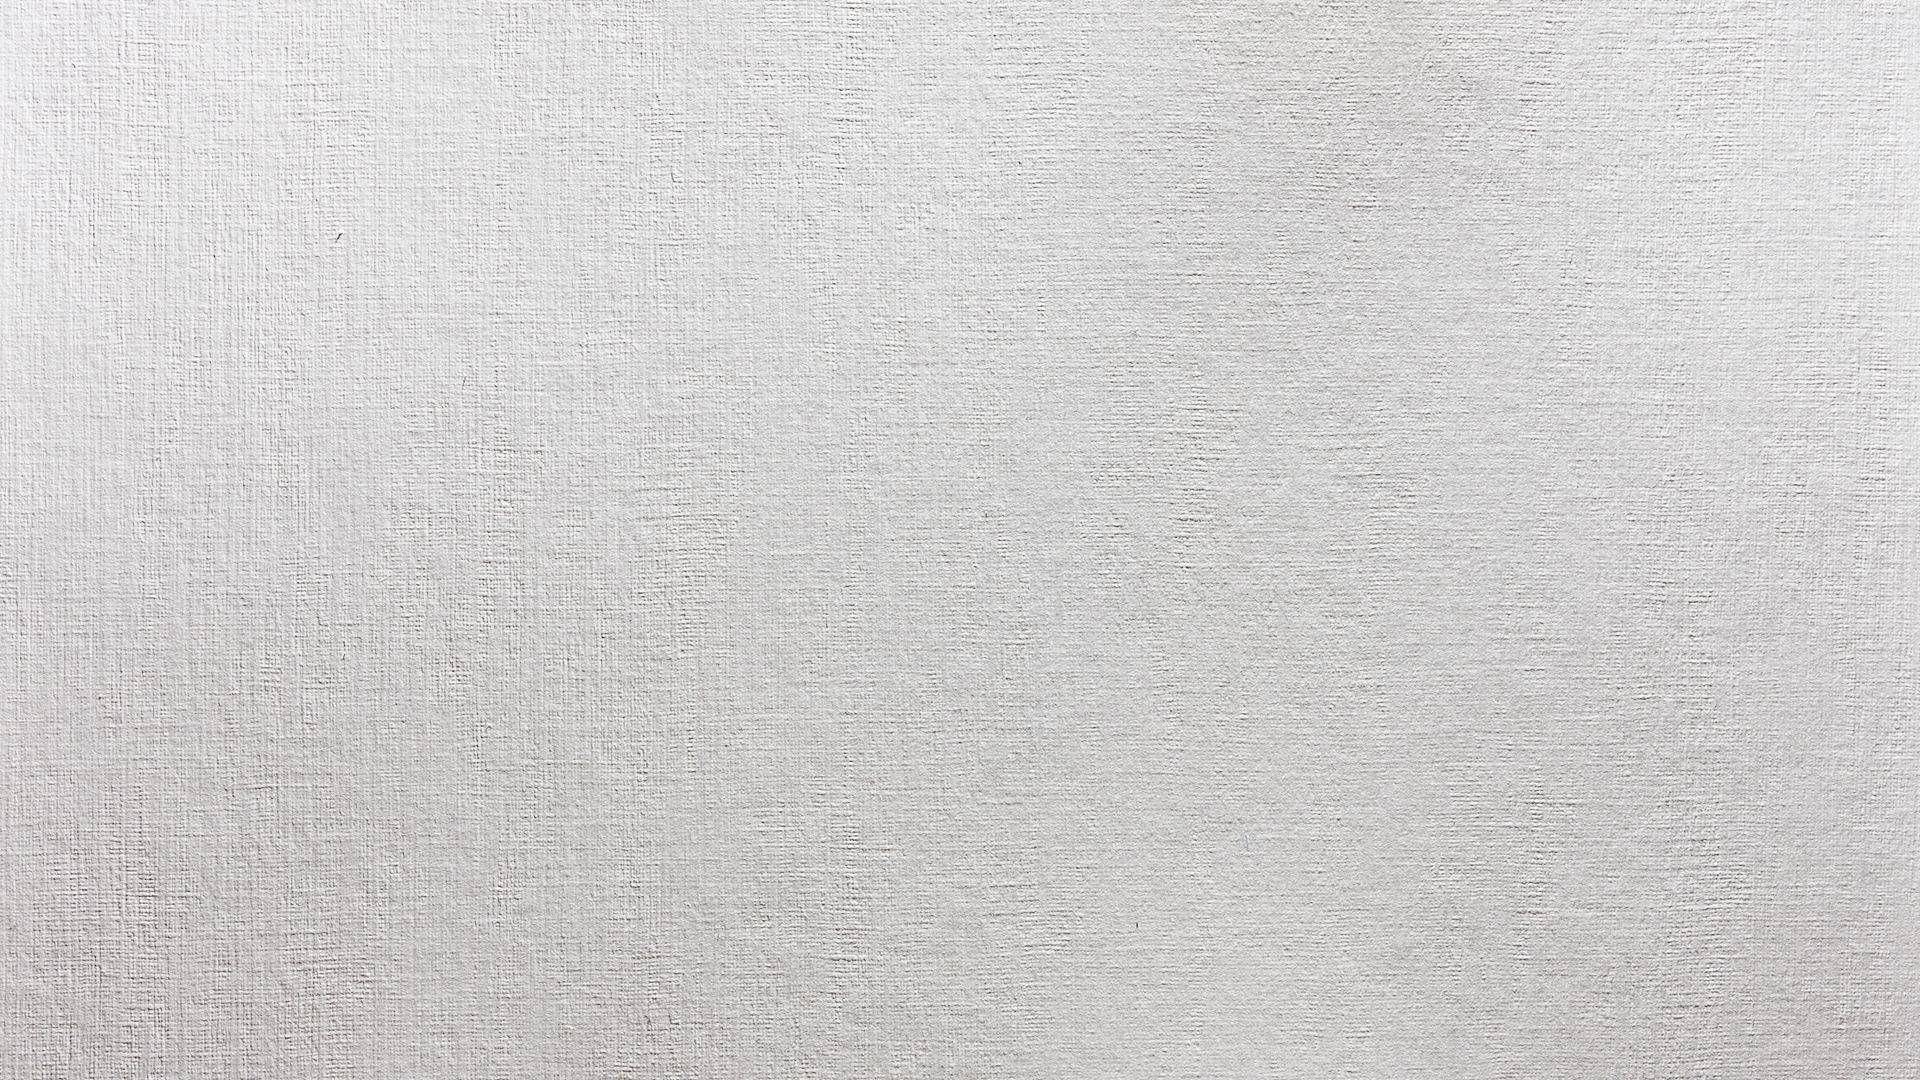 Sketch Paper White Texture Background